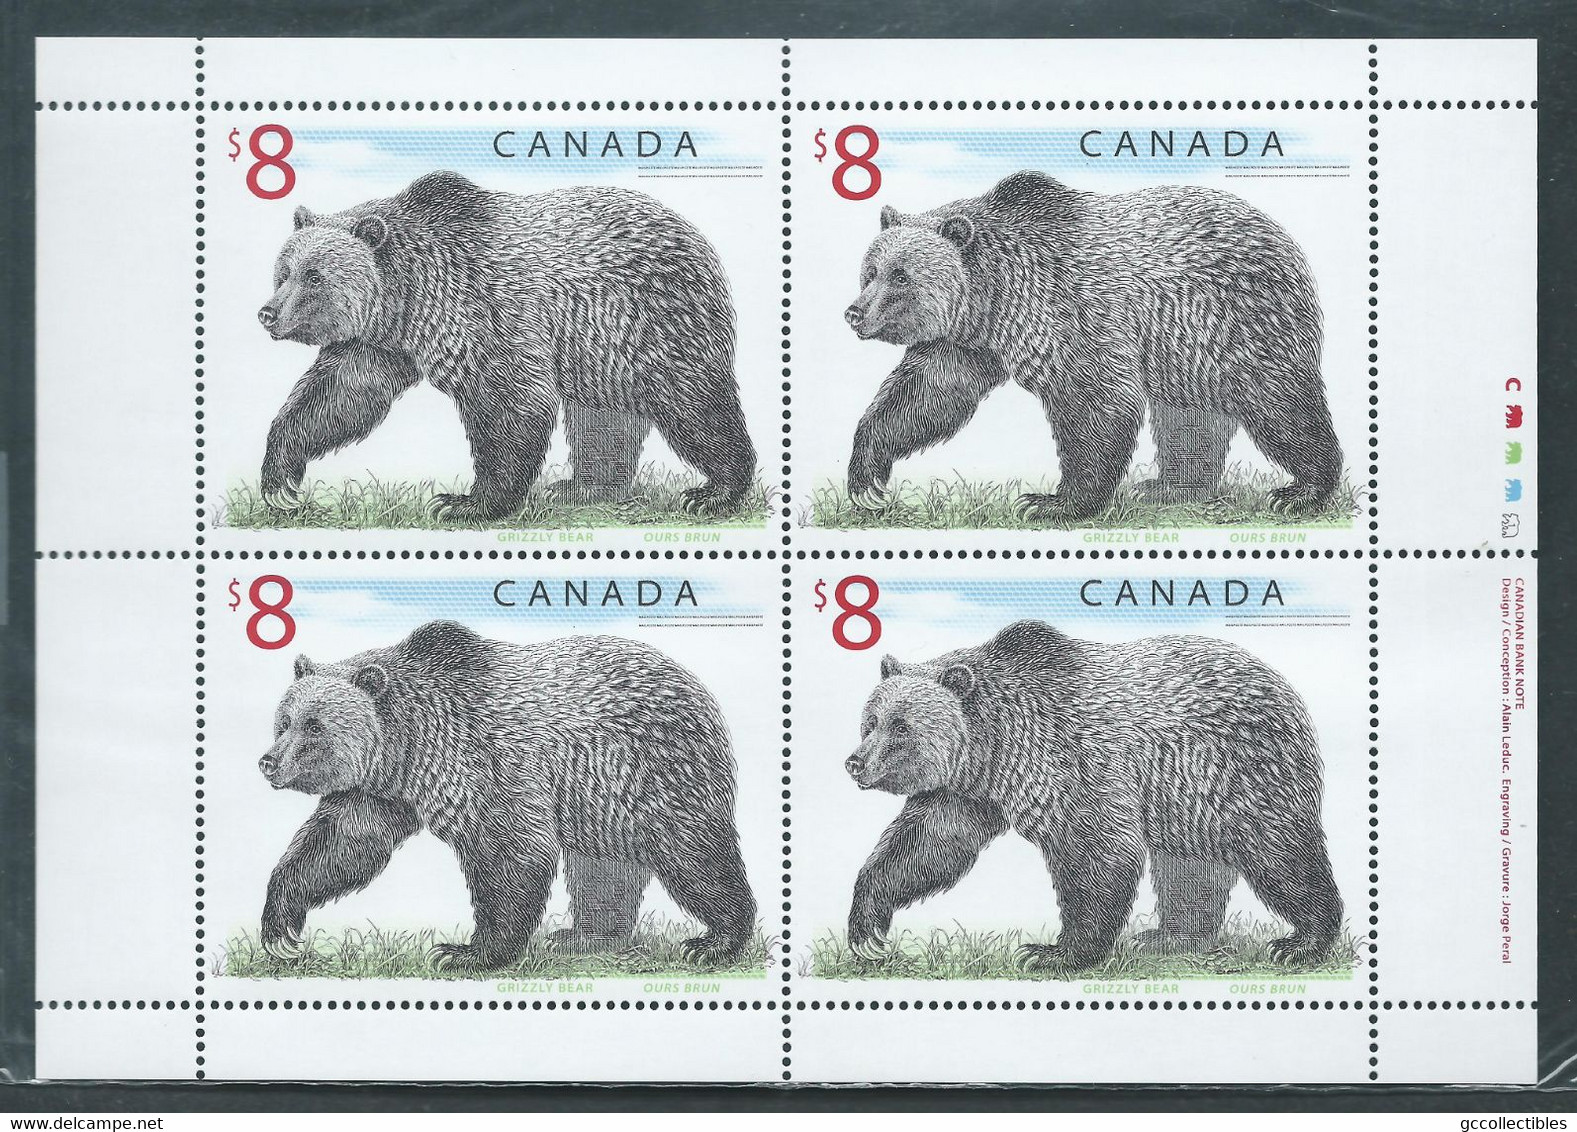 Canada # 1694 Full Pane Of 4 MNH With Inscription - Wildlife Defiitives - Grizzly Bear - Fogli Completi